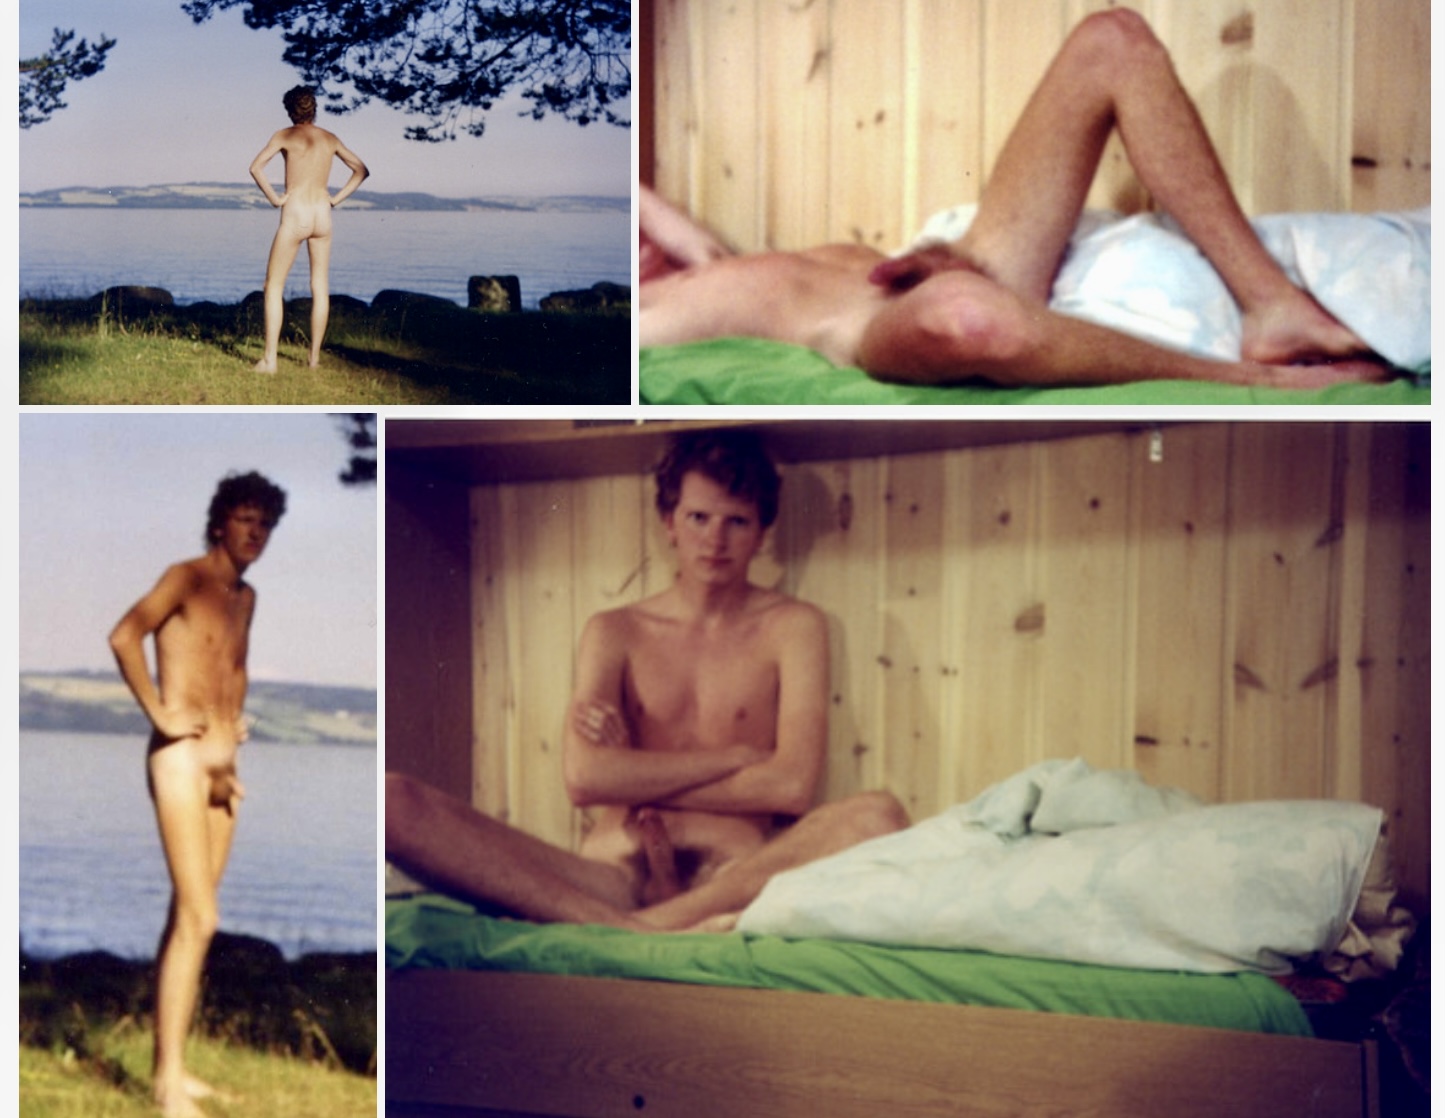 Bjørn has been an exhibitionist for decades